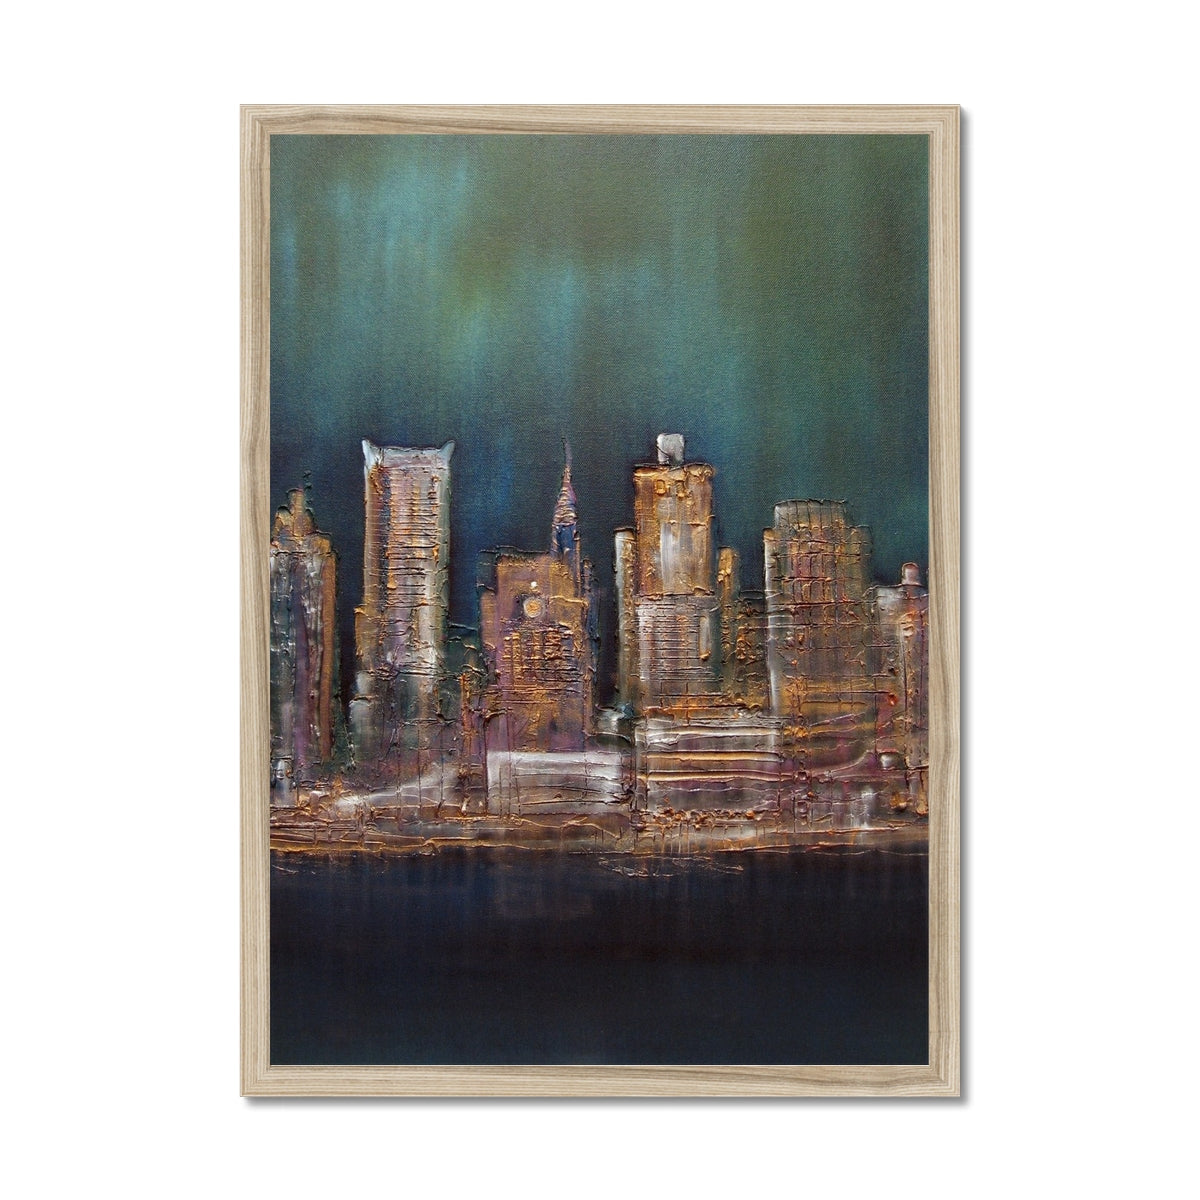 New York West Side Painting | Framed Prints From Scotland-Framed Prints-World Art Gallery-A2 Portrait-Natural Frame-Paintings, Prints, Homeware, Art Gifts From Scotland By Scottish Artist Kevin Hunter